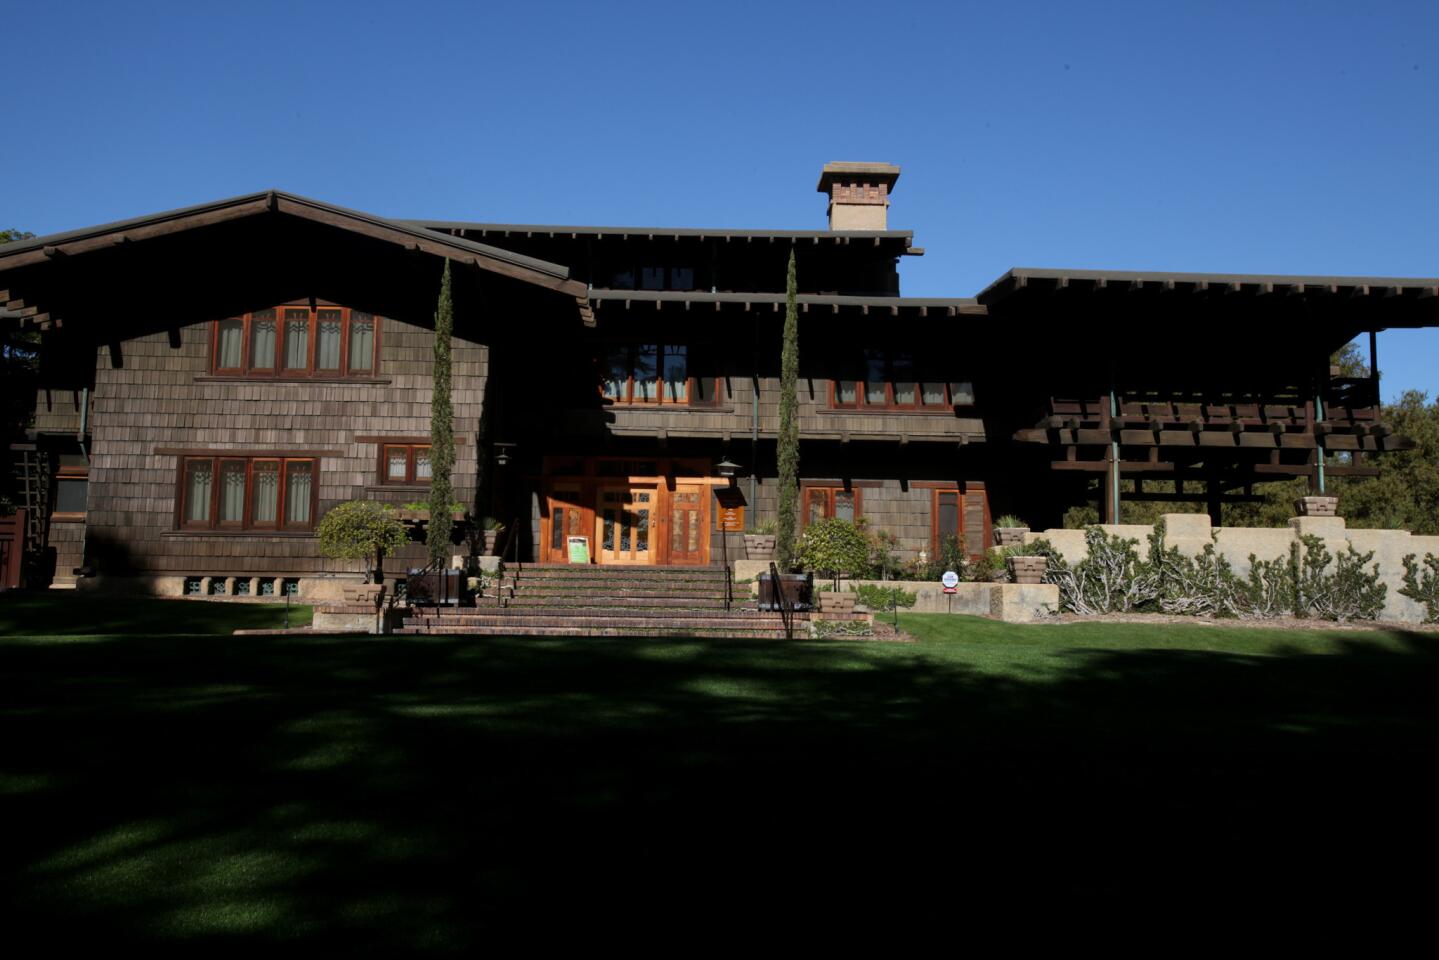 The Gamble House in Pasadena, a Craftsman masterpiece designed by architects Greene & Greene, is offering "Upstairs Downstairs" tours of servants' quarters July 30-Aug. 16.